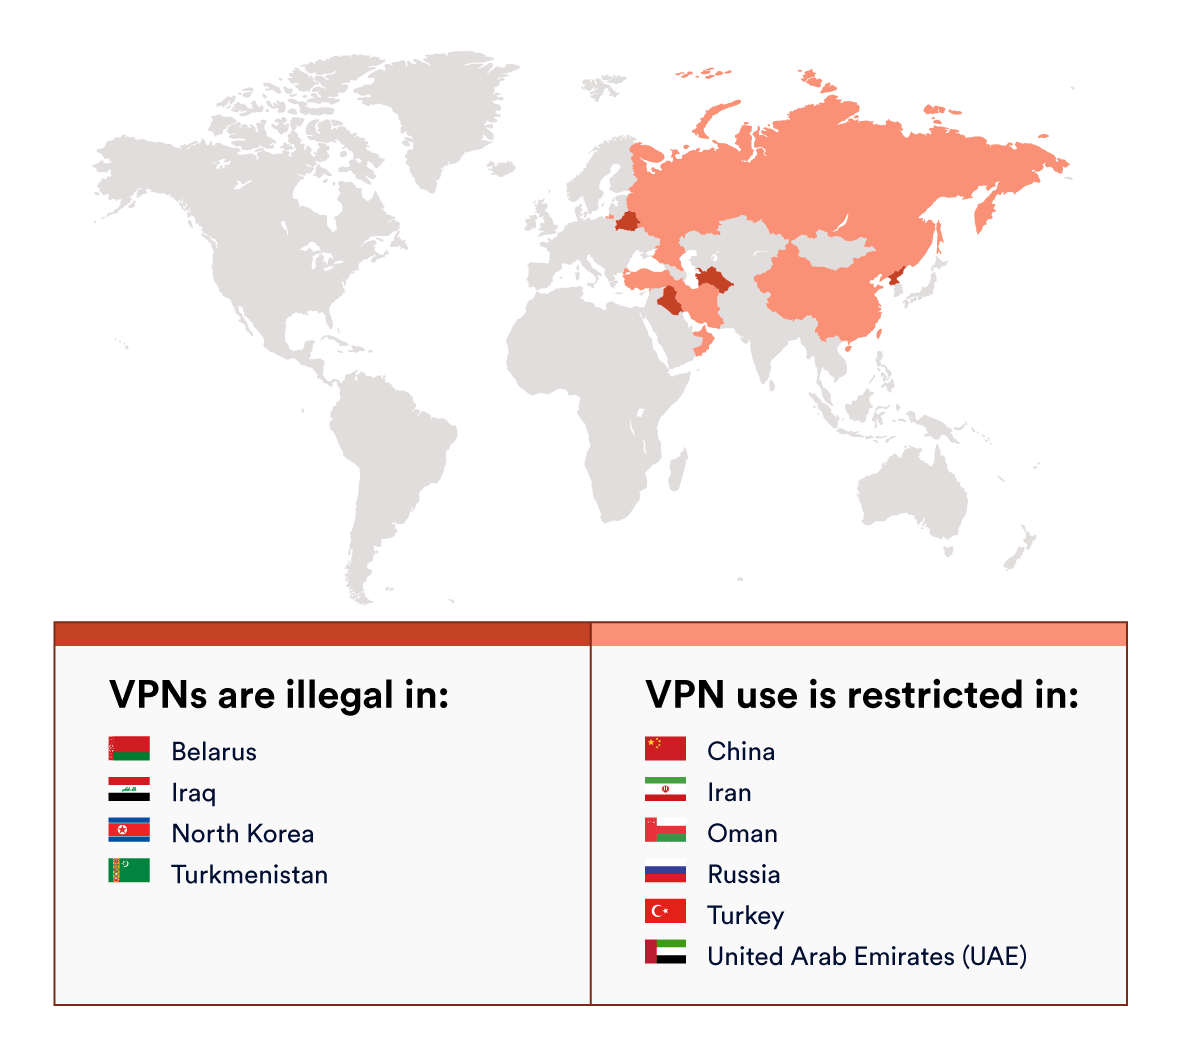 Is it illegal to use VPN in USA?